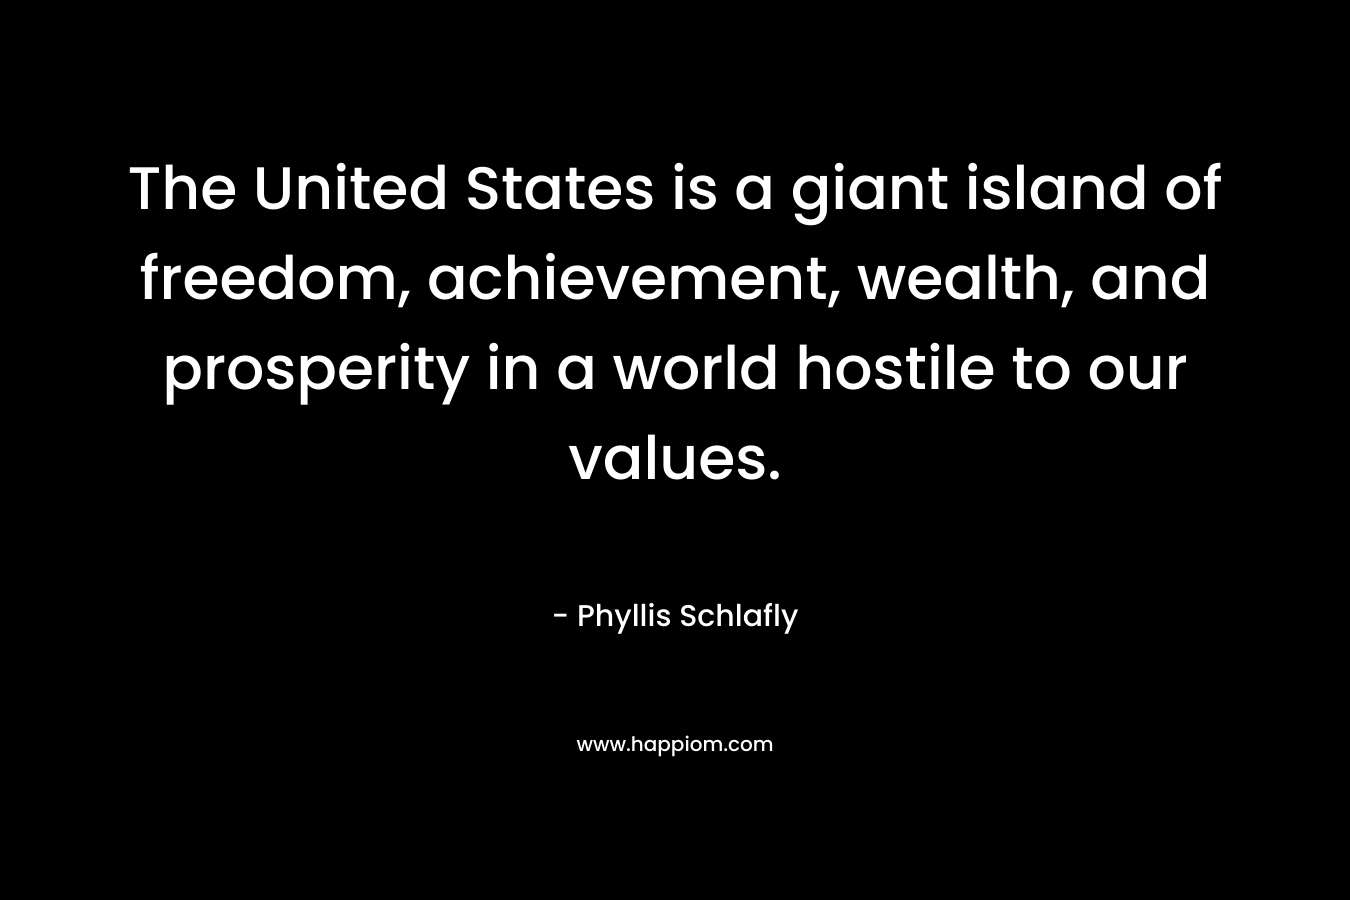 The United States is a giant island of freedom, achievement, wealth, and prosperity in a world hostile to our values.